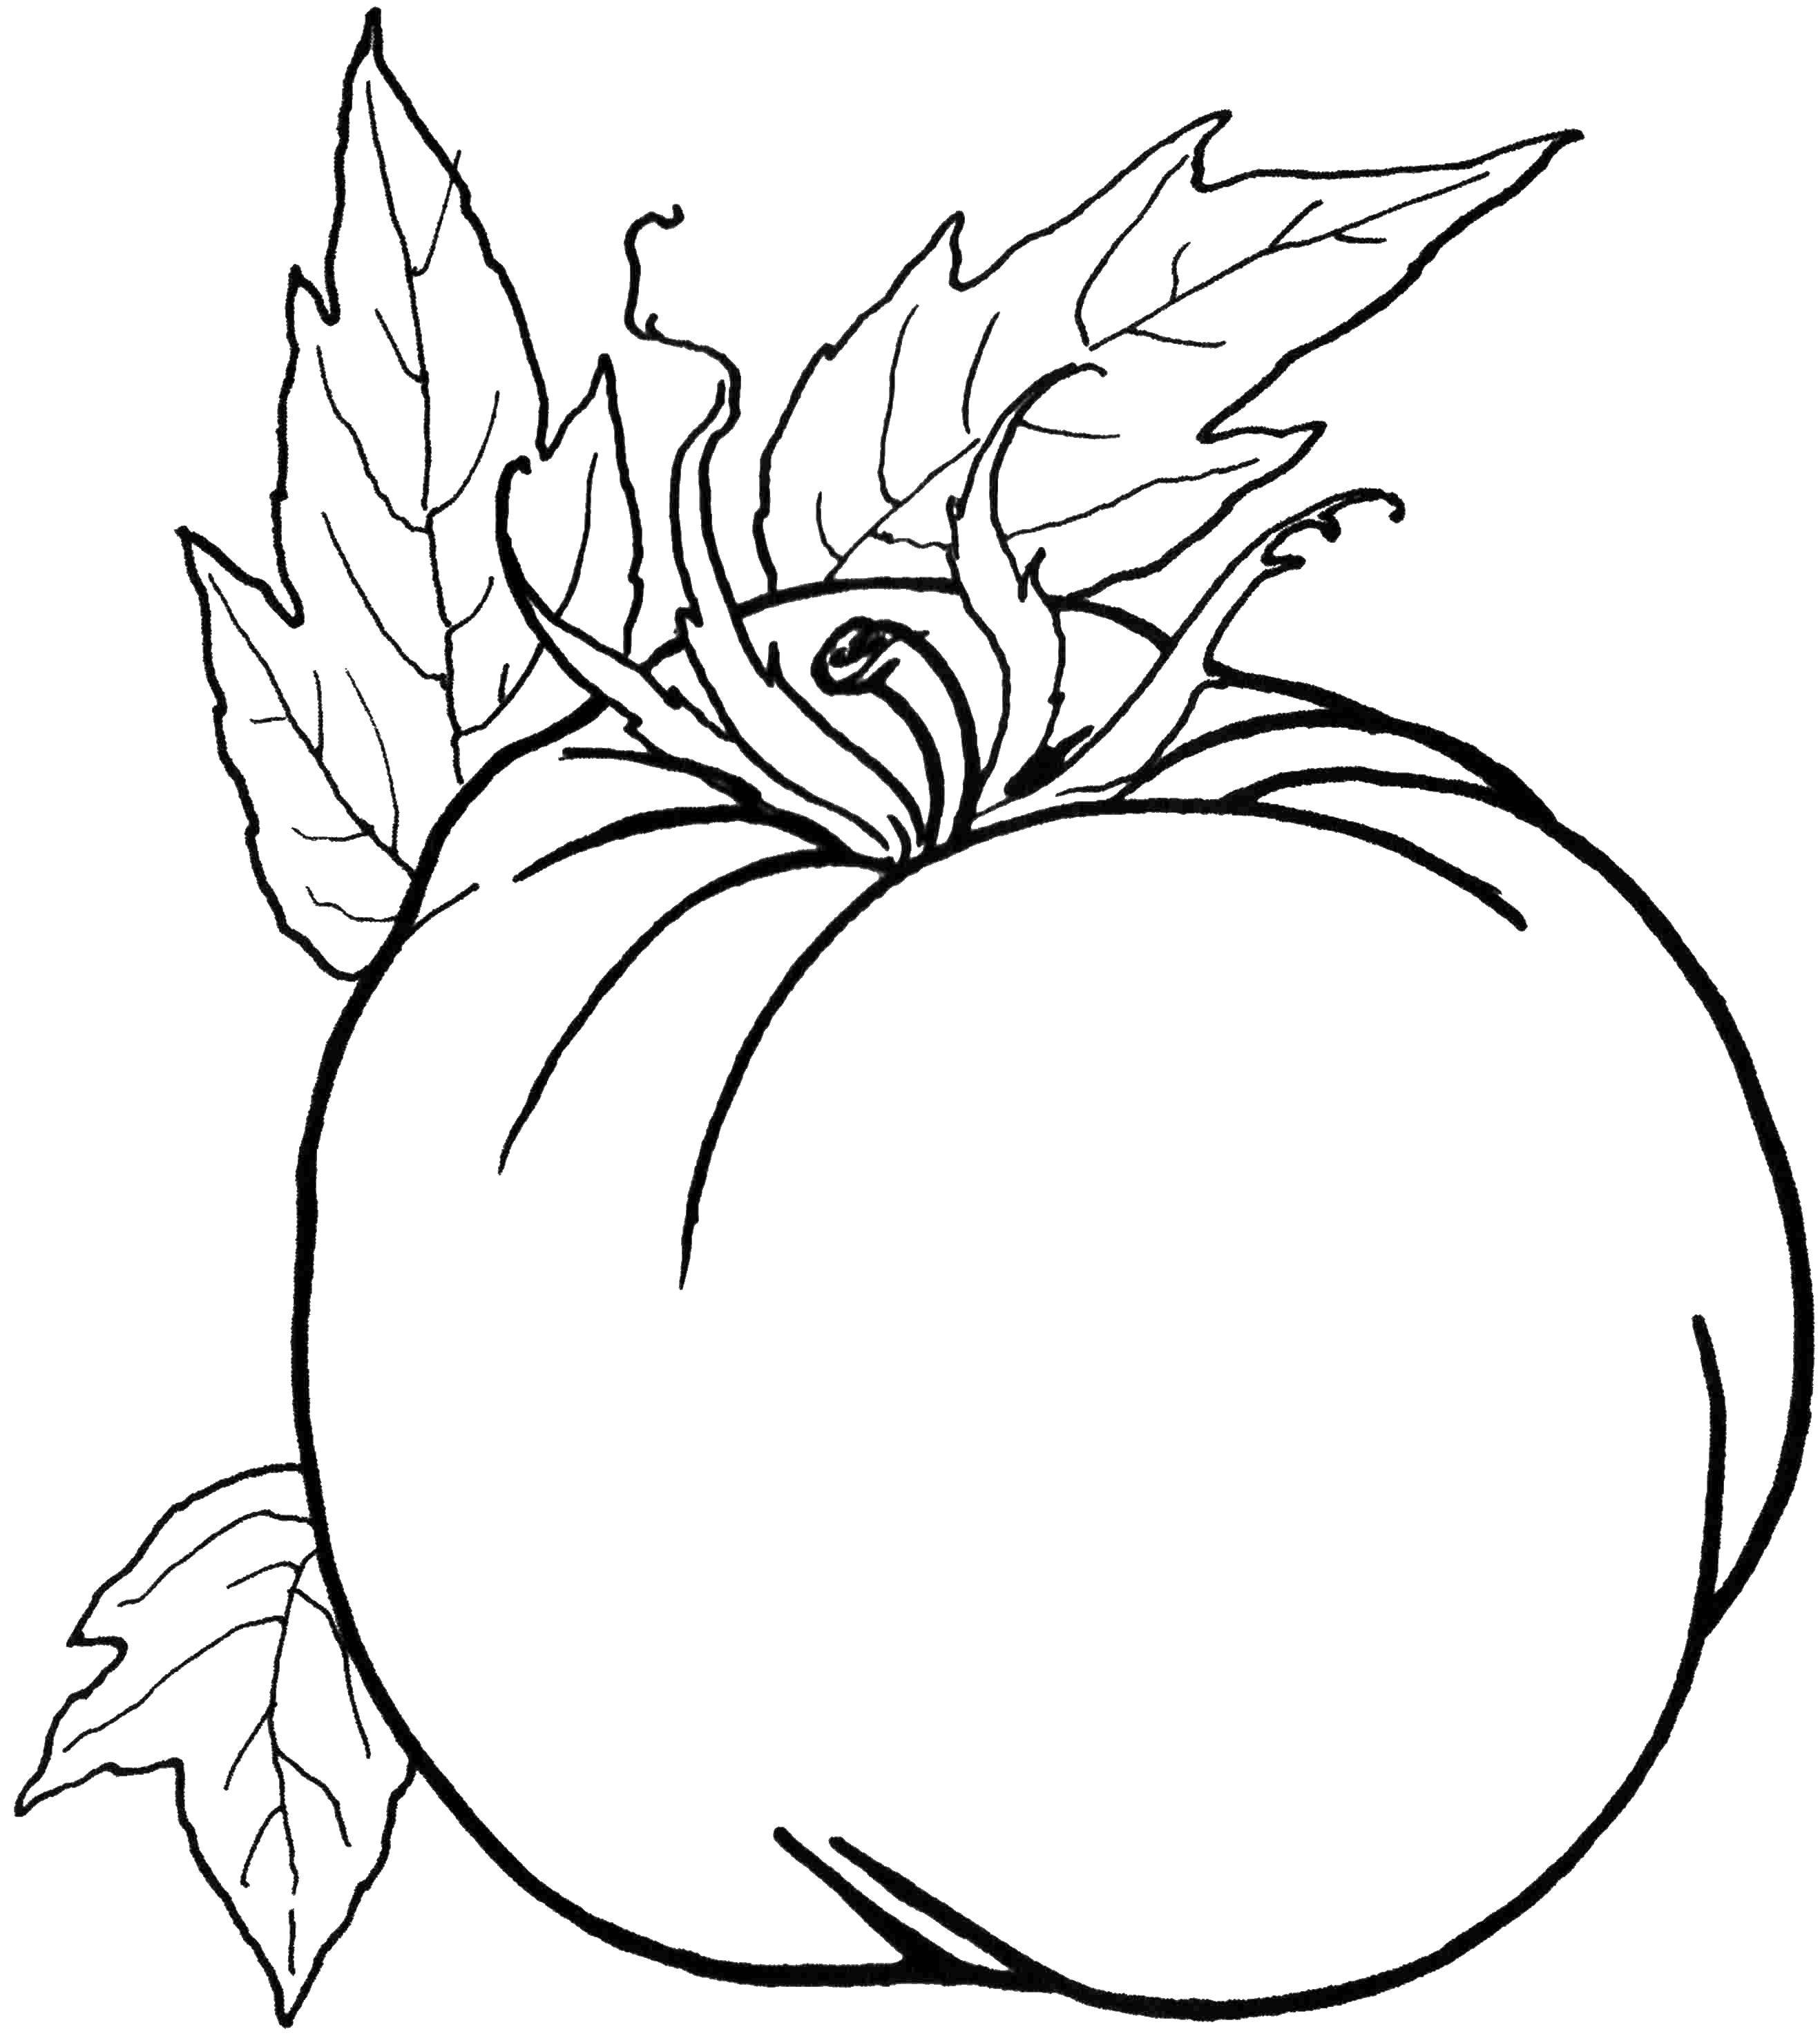 Coloring Tomatoes. Category Vegetables. Tags:  vegetables, tomatoes.